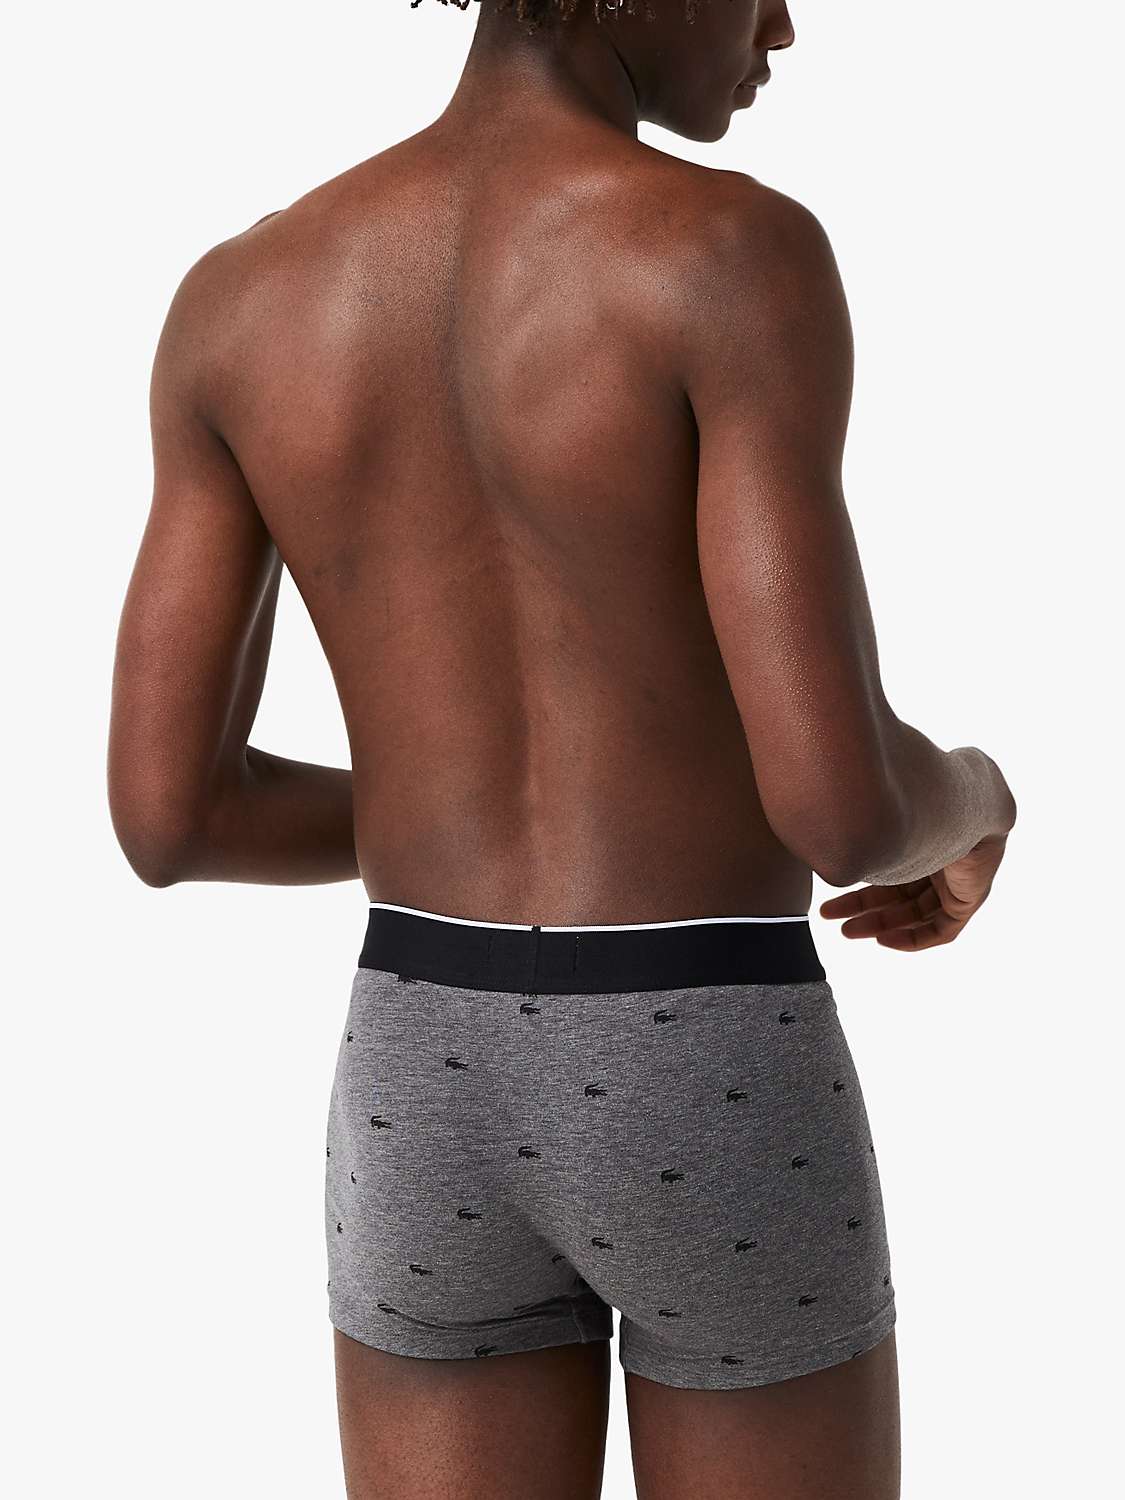 Buy Lacoste Signature Trunks, Pack of 3 Online at johnlewis.com